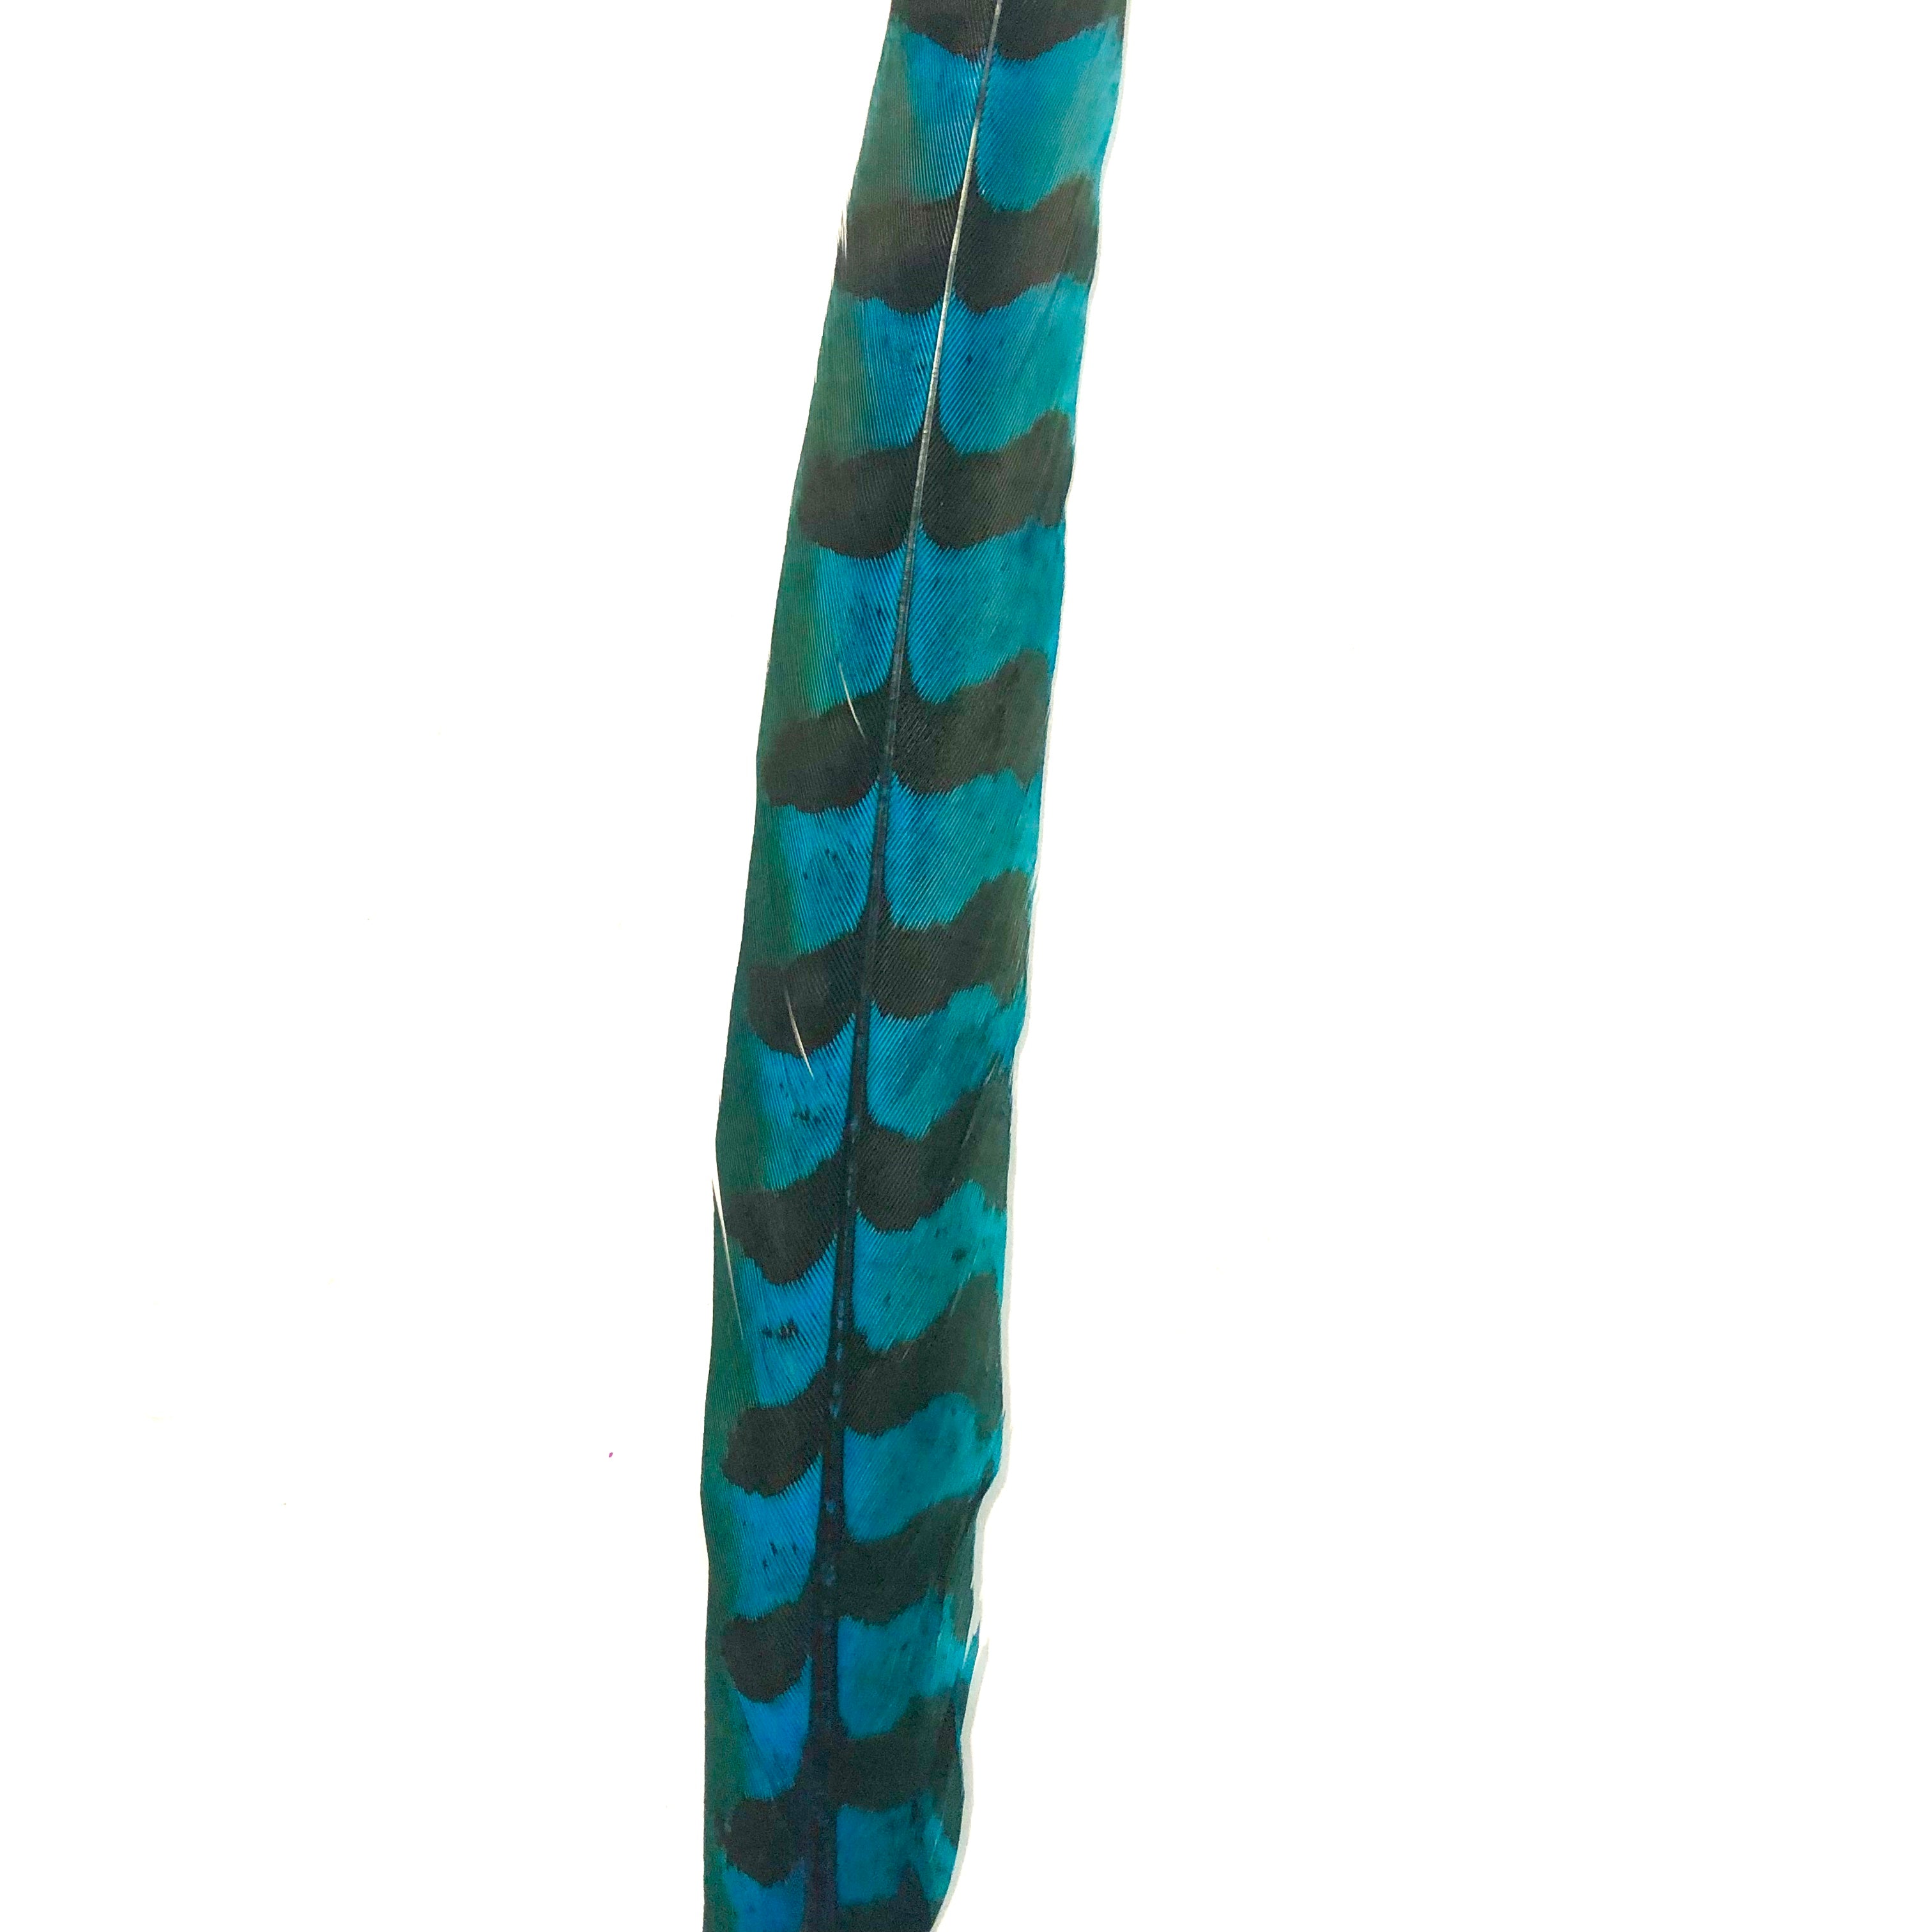 12" to 14" Reeves Pheasant Tail Feather - Turquoise